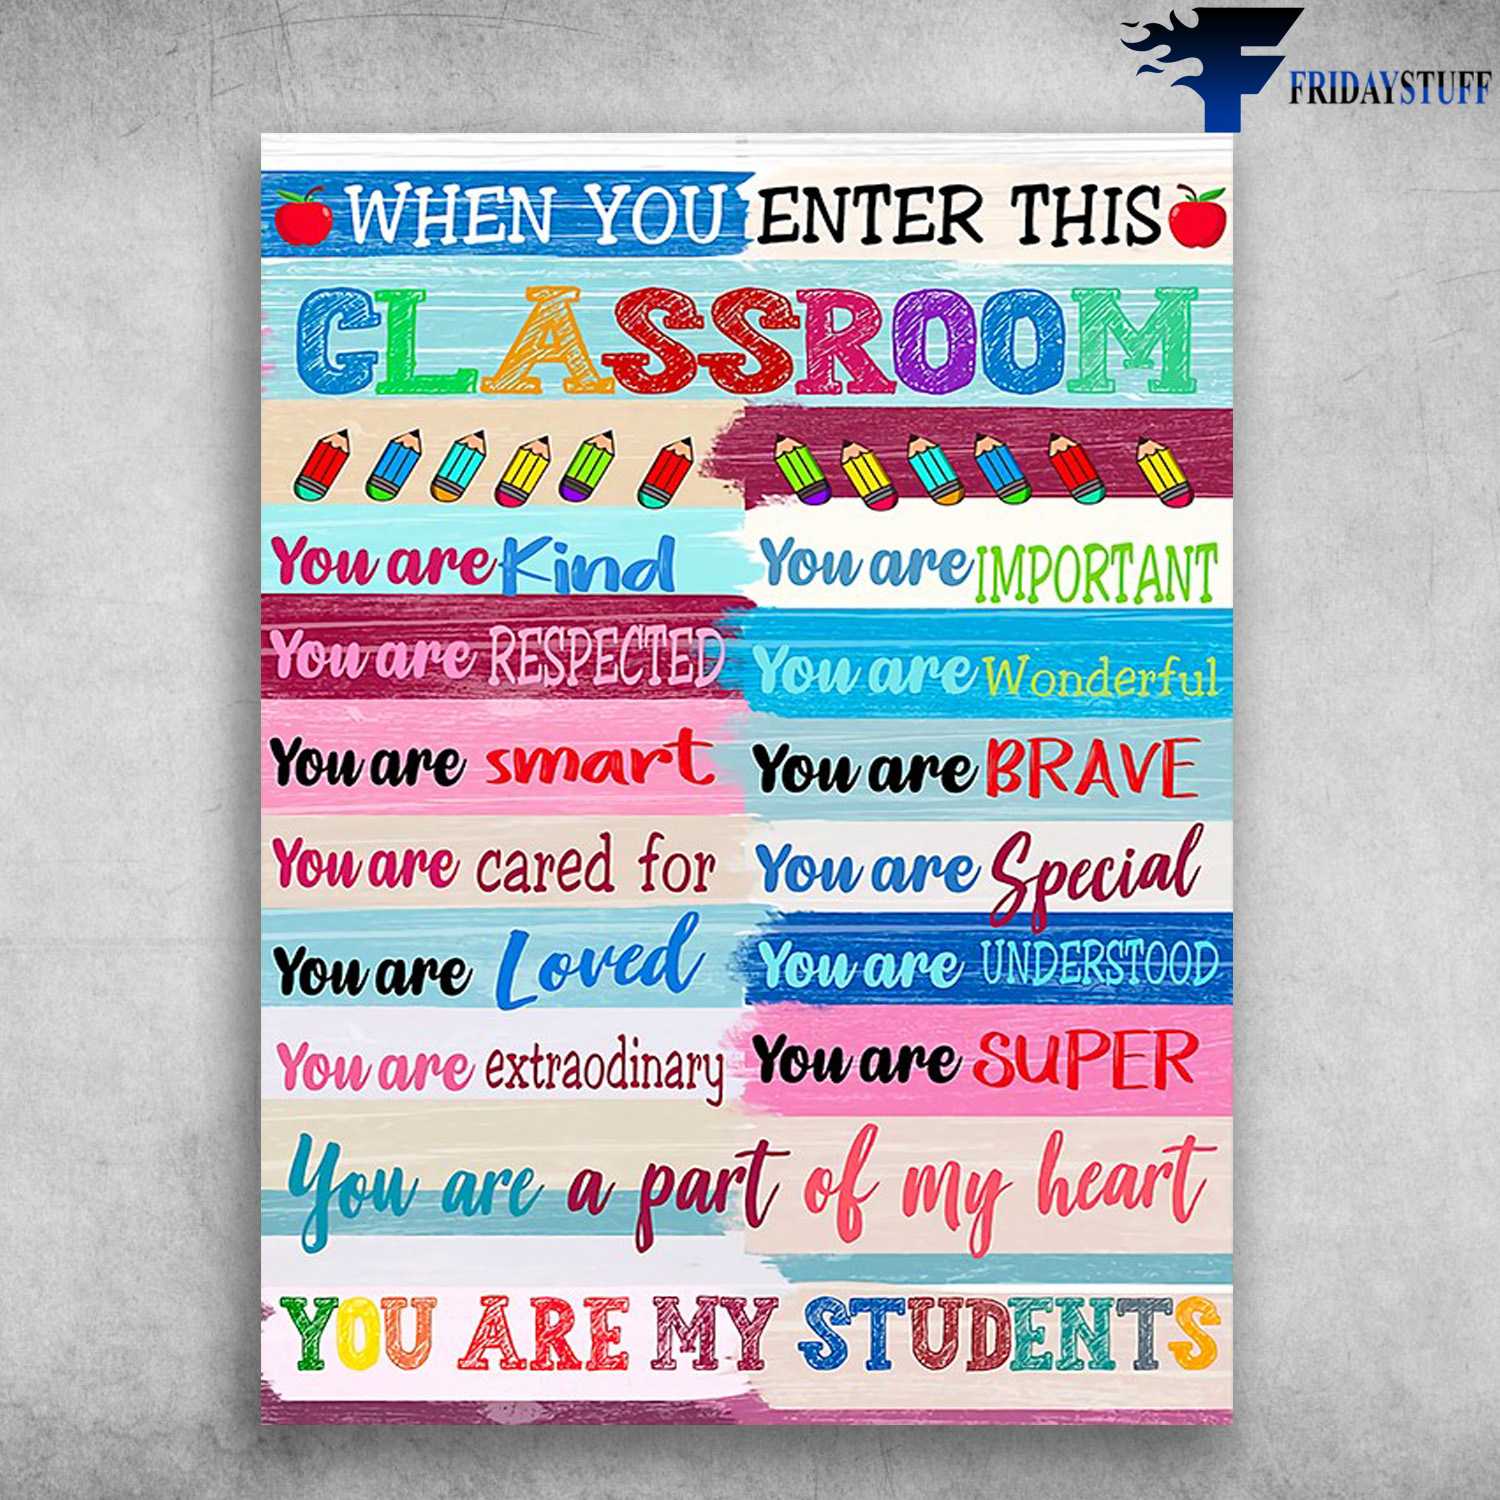 Classroom Rules, Back To School - When You Enter This Classroom, You Are Kind, You Are Important, You Are Respected, You Are Wonderful, You Are Smart, You Are Brave, You Are My Students